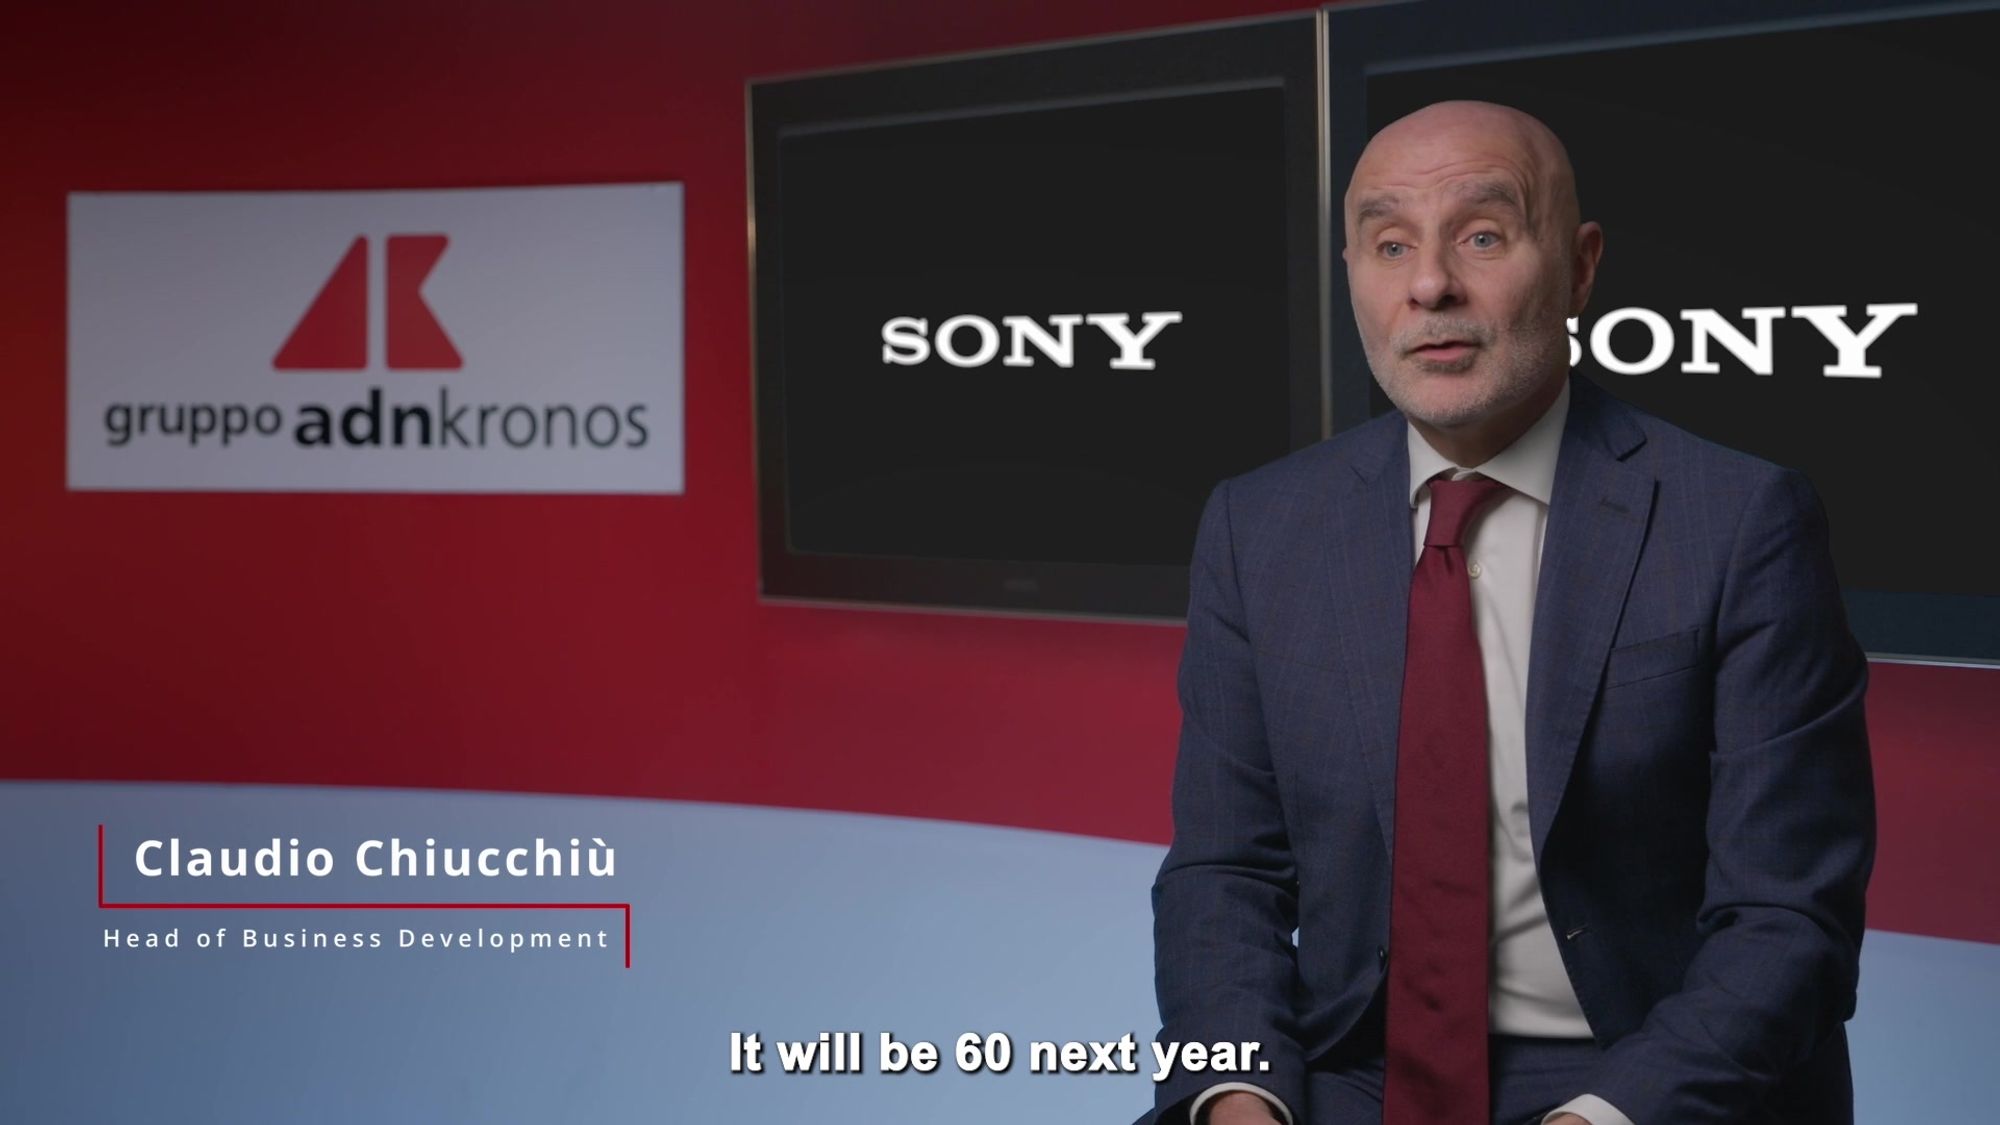 Man in an interview with grupo adnkronos and sony logos